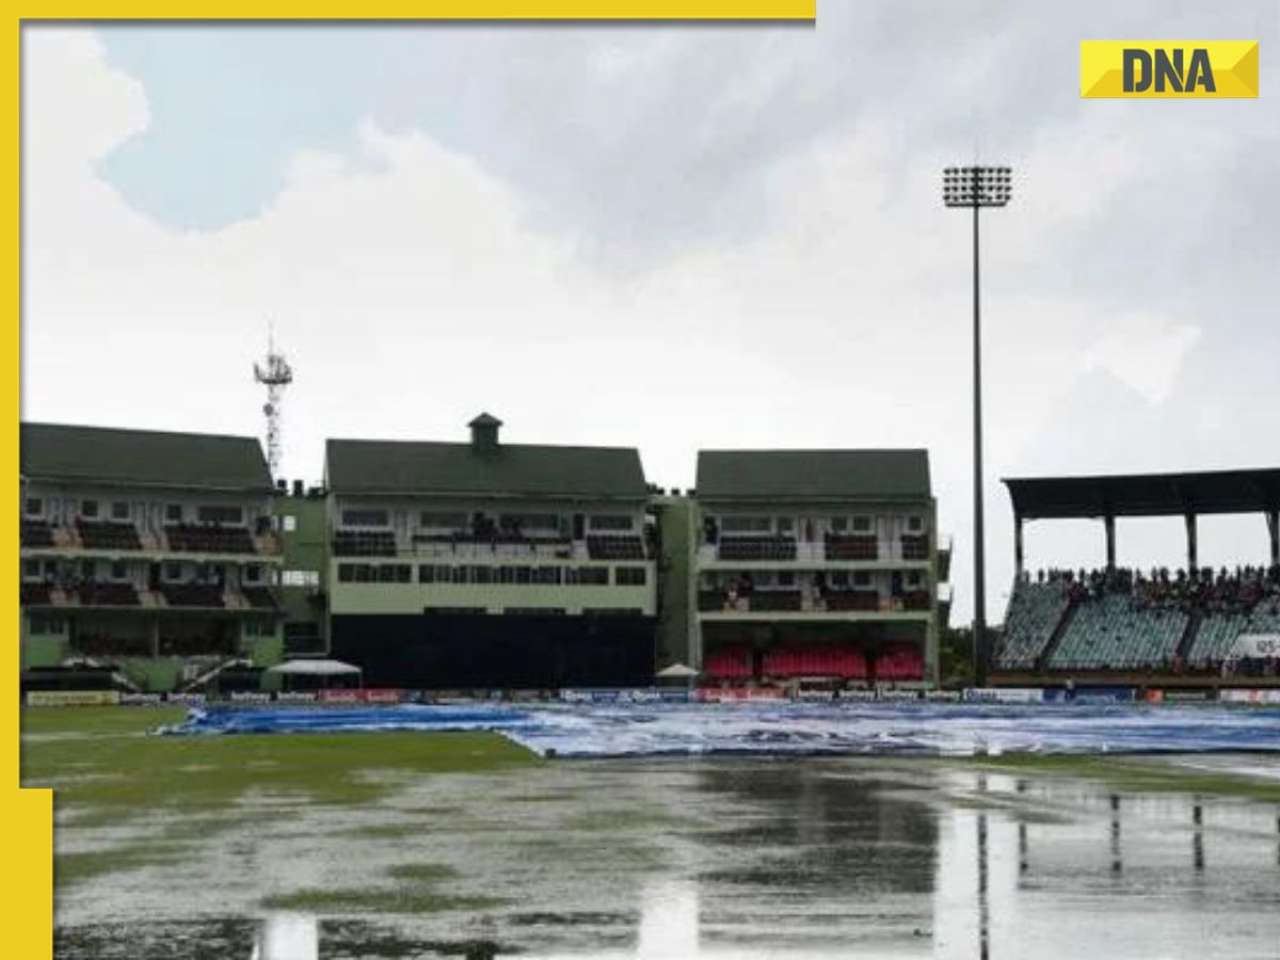 T20 World Cup, IND vs ENG: Who will qualify for final if rain plays spoilsport in Guyana? Know DLS rules, cut-off time